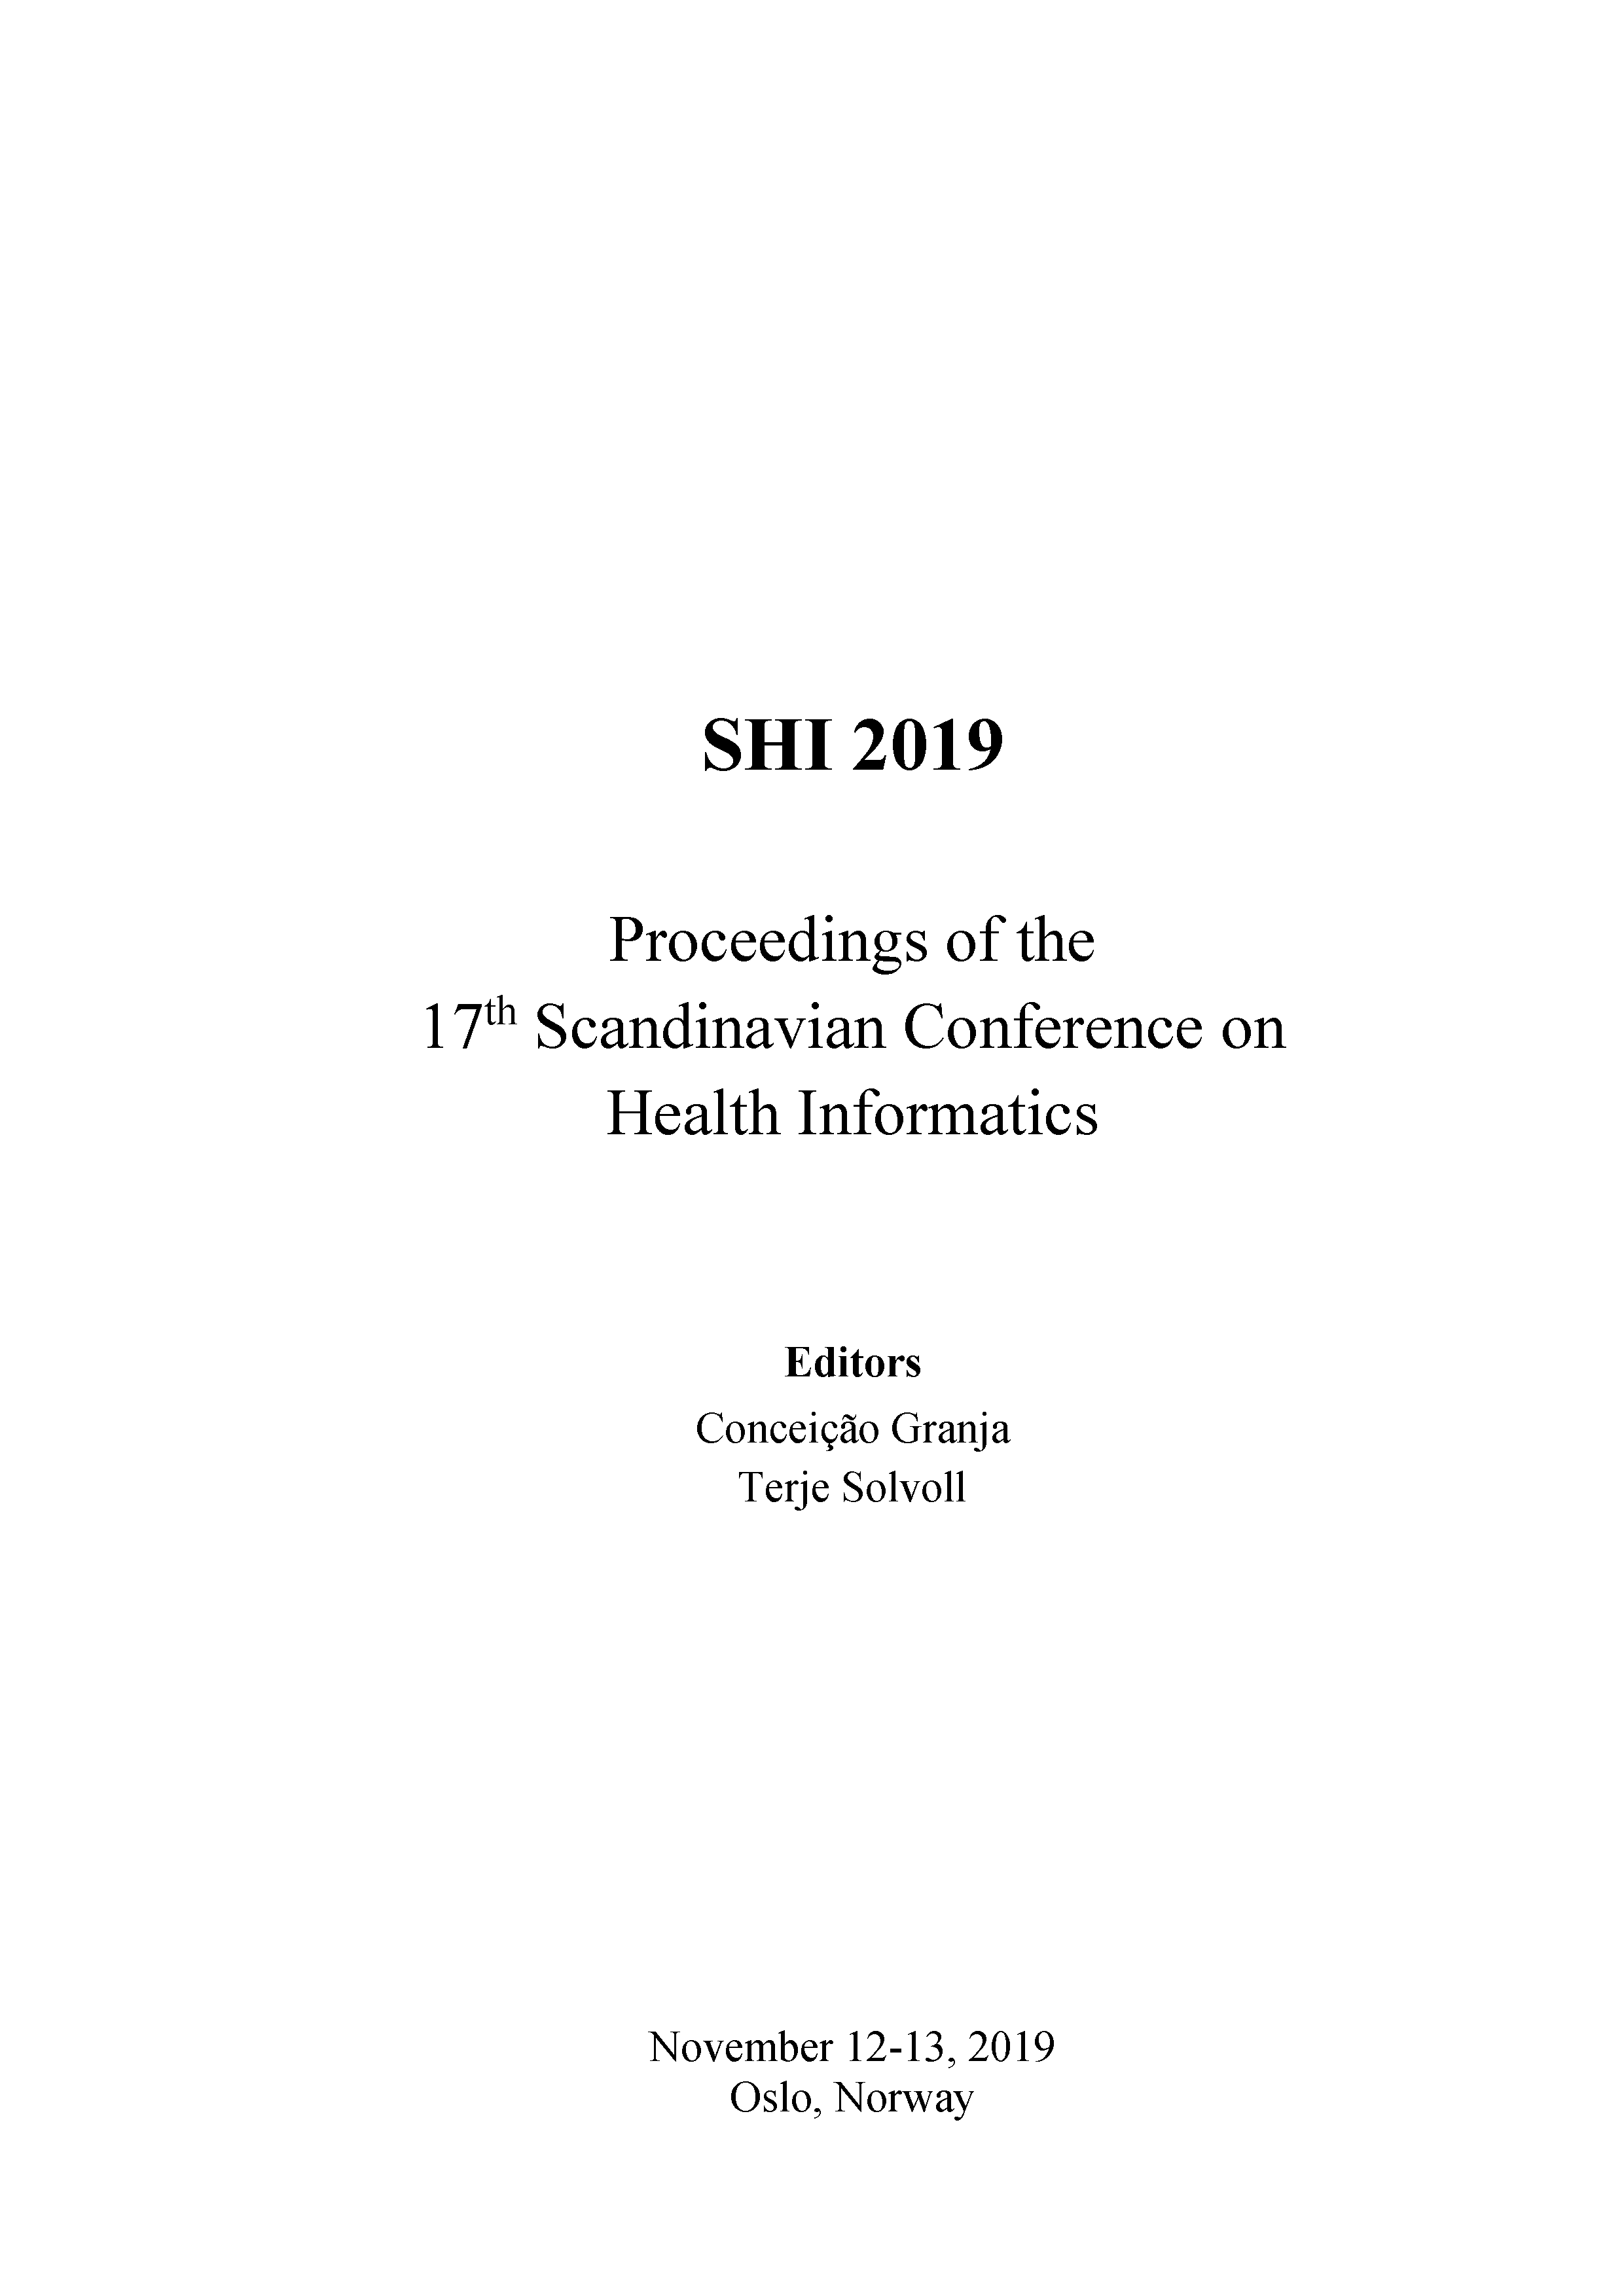 					View SHI 2019. Proceedings of the 17th Scandinavian Conference on Health Informatics, November 12-13, 2019, Oslo, Norway
				